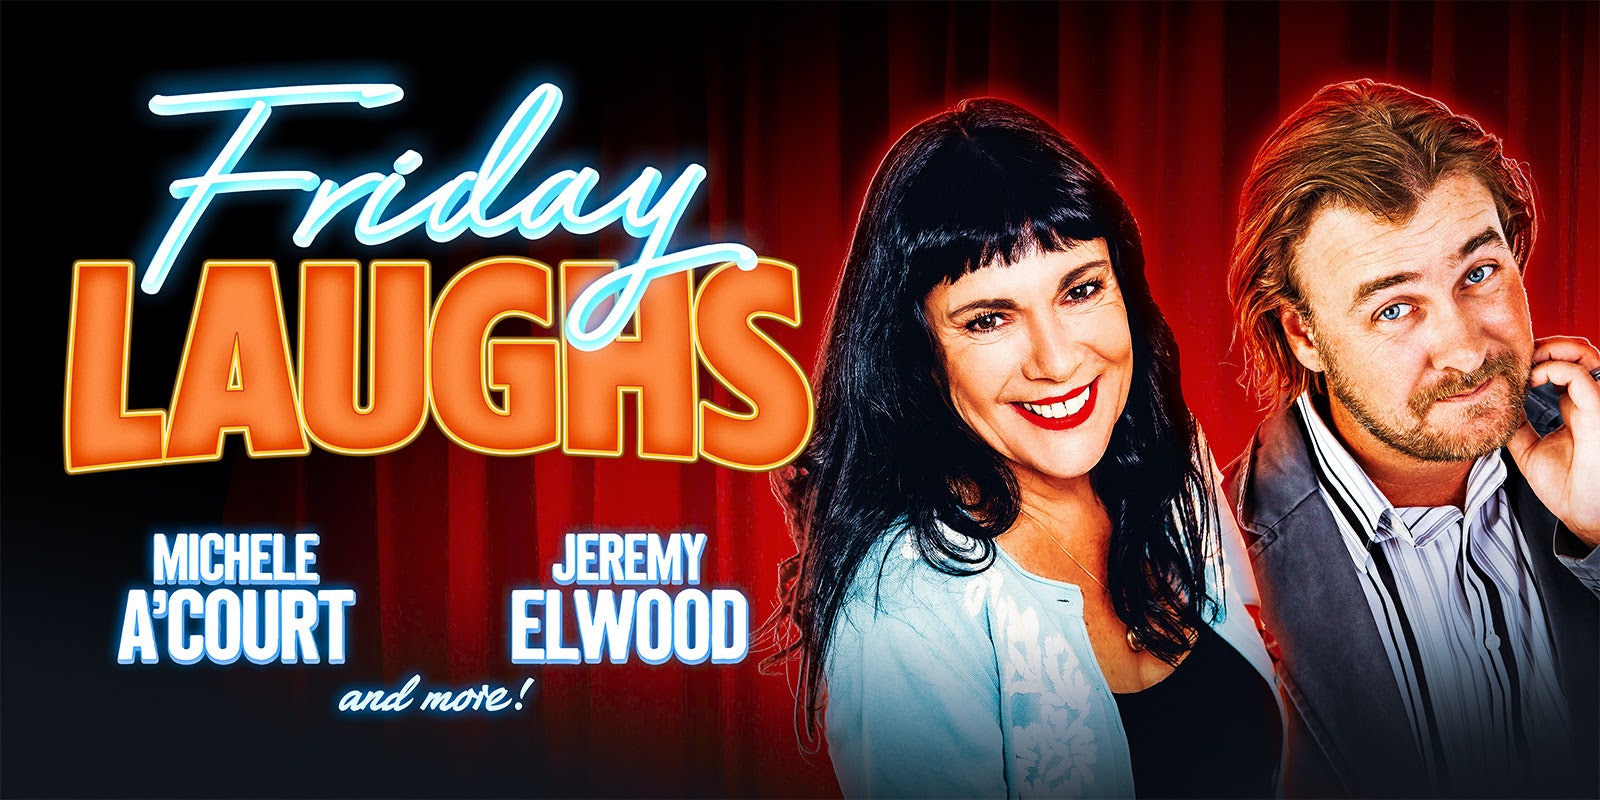 Friday Laughs with Michele A'Court and Jeremy Elwood